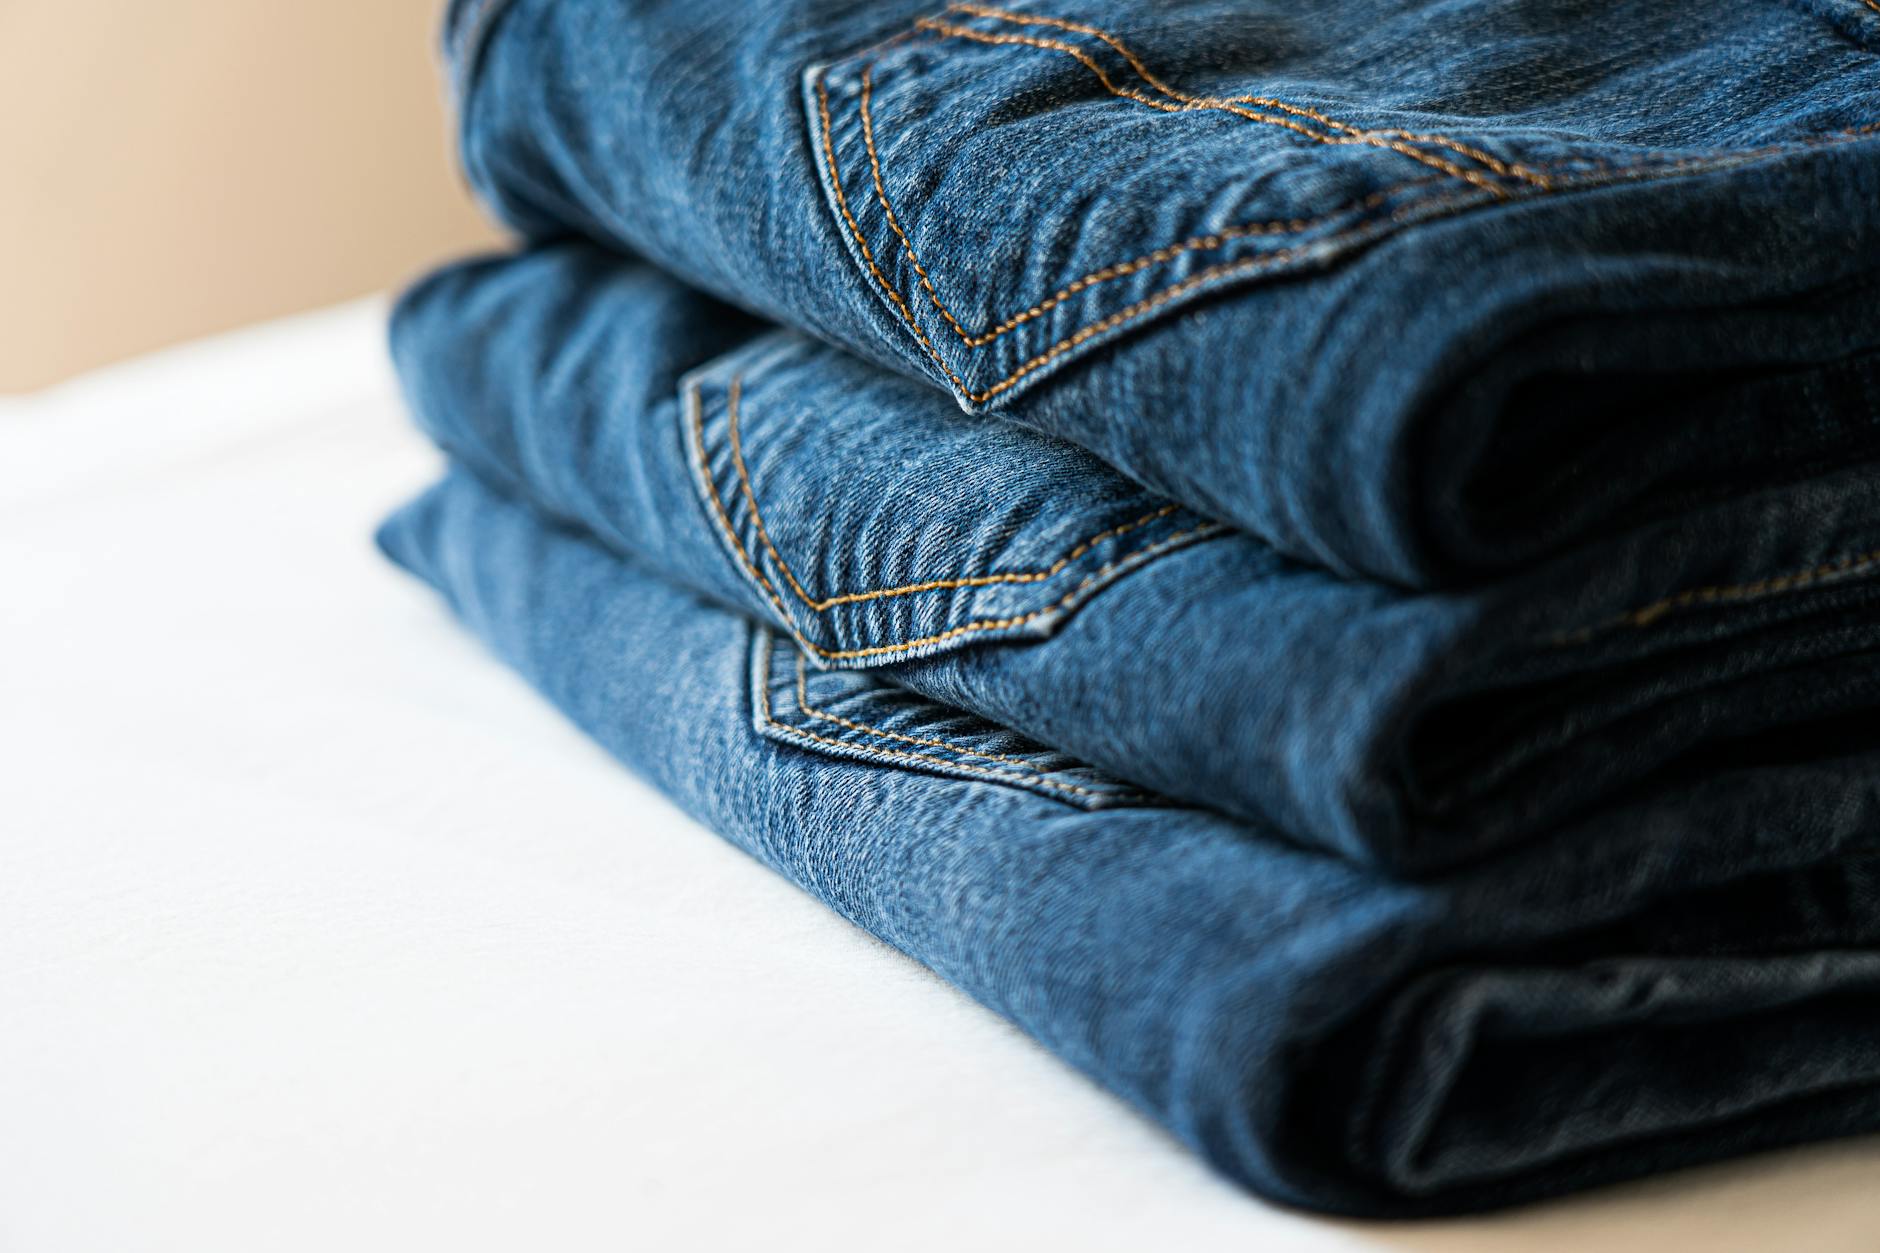 Person Wearing Blue Denim Jeans · Free Stock Photo